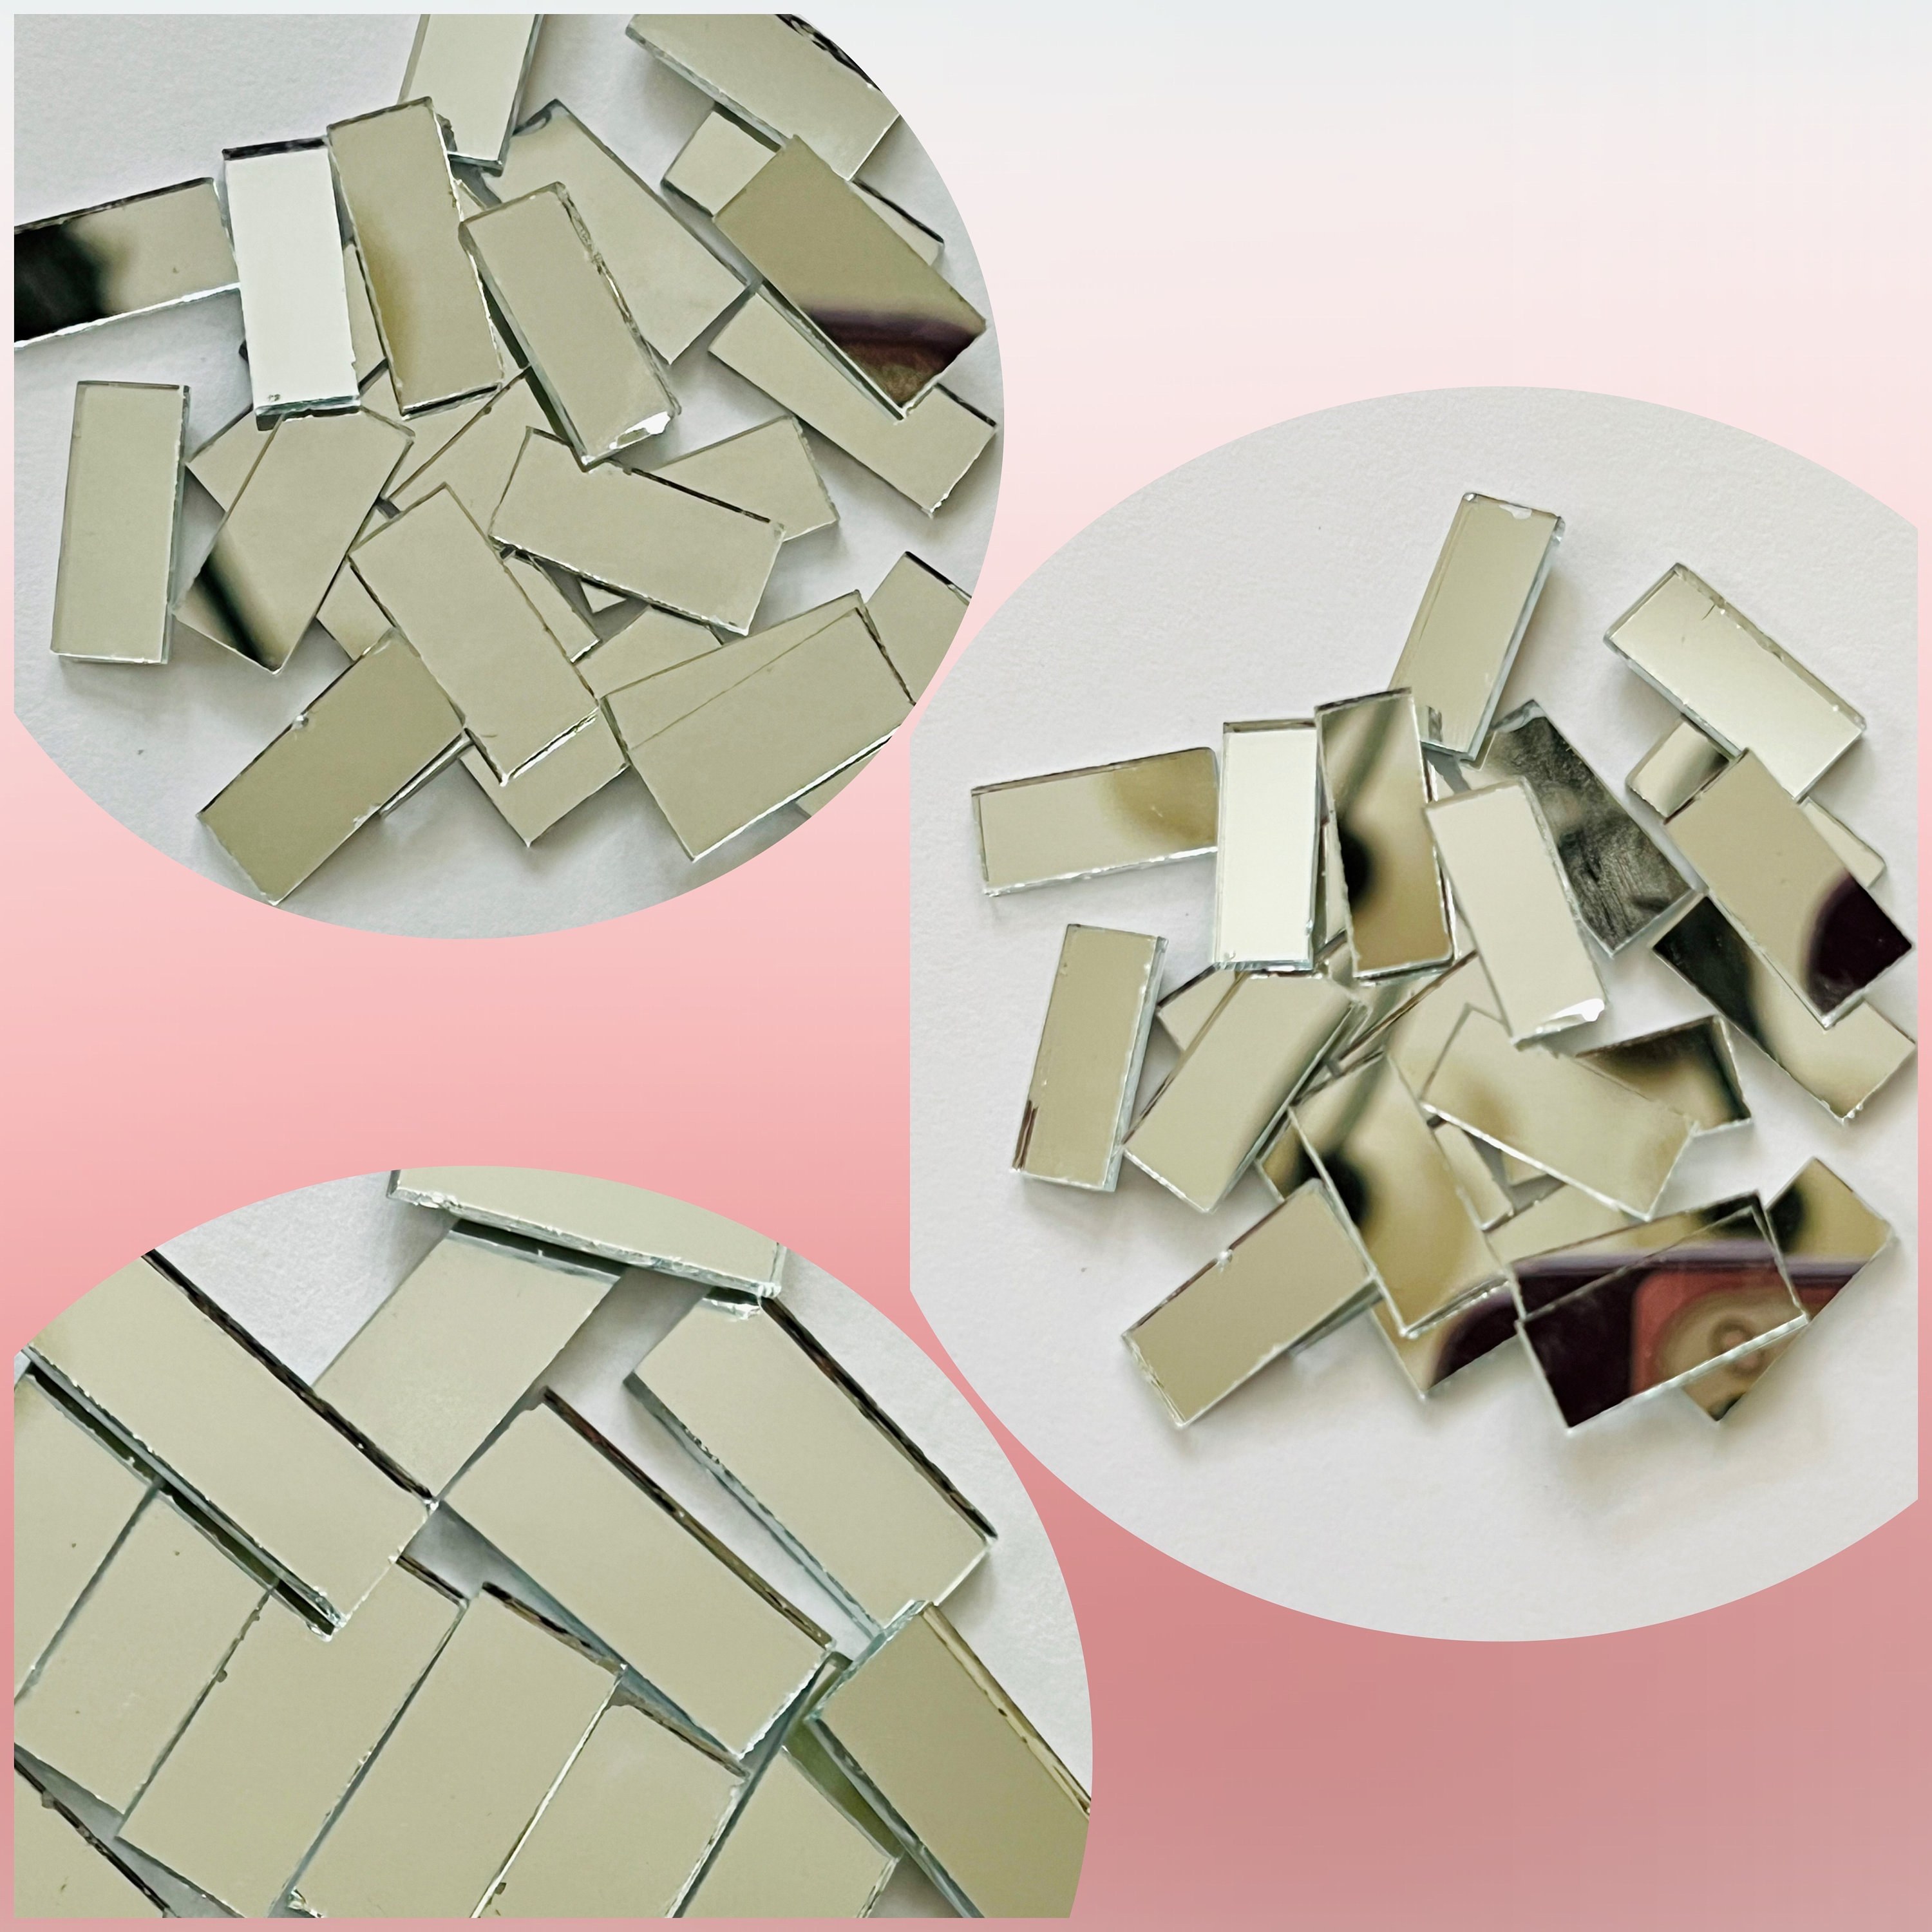 Small Mini Square Craft Mirrors 0.5 & 1 inch 25 Pieces Mirror Mosaic Tiles